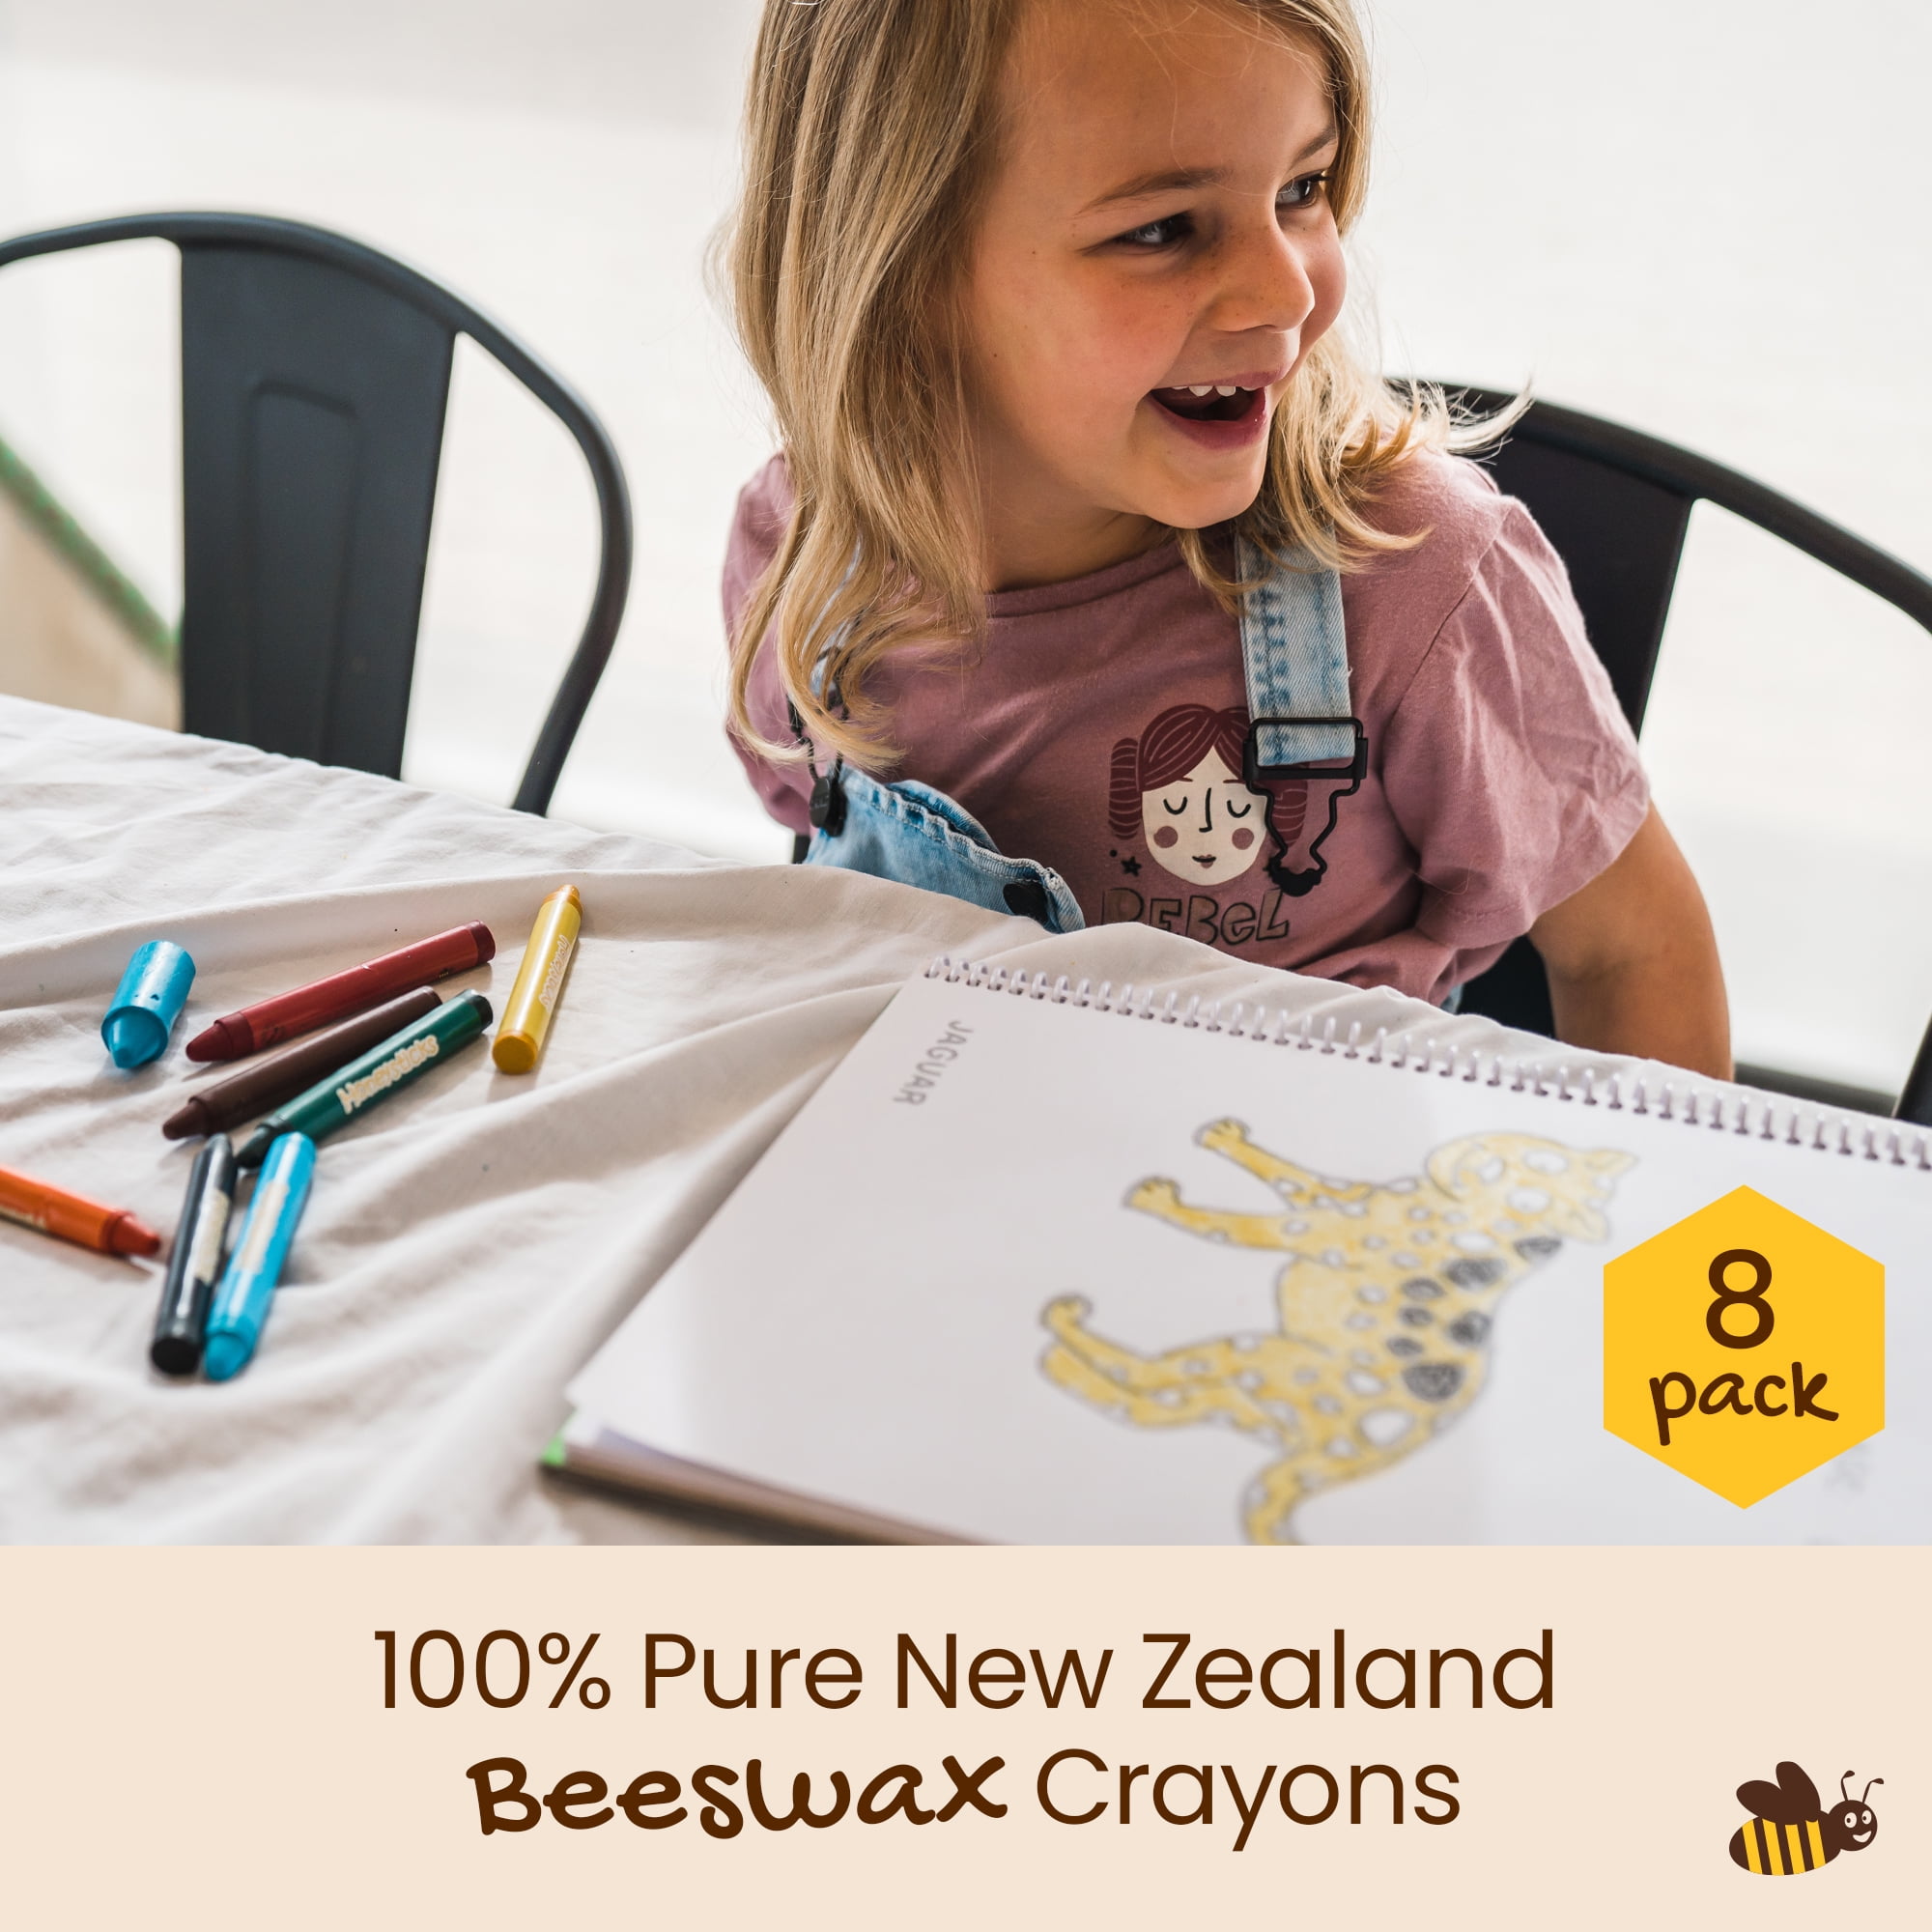 Honeysticks 100% Pure Beeswax Crayons (12 Pack) - Non-Toxic Crayons, Safe  for Babies and Toddlers, For 1 Year Plus, Handmade in New Zealand with